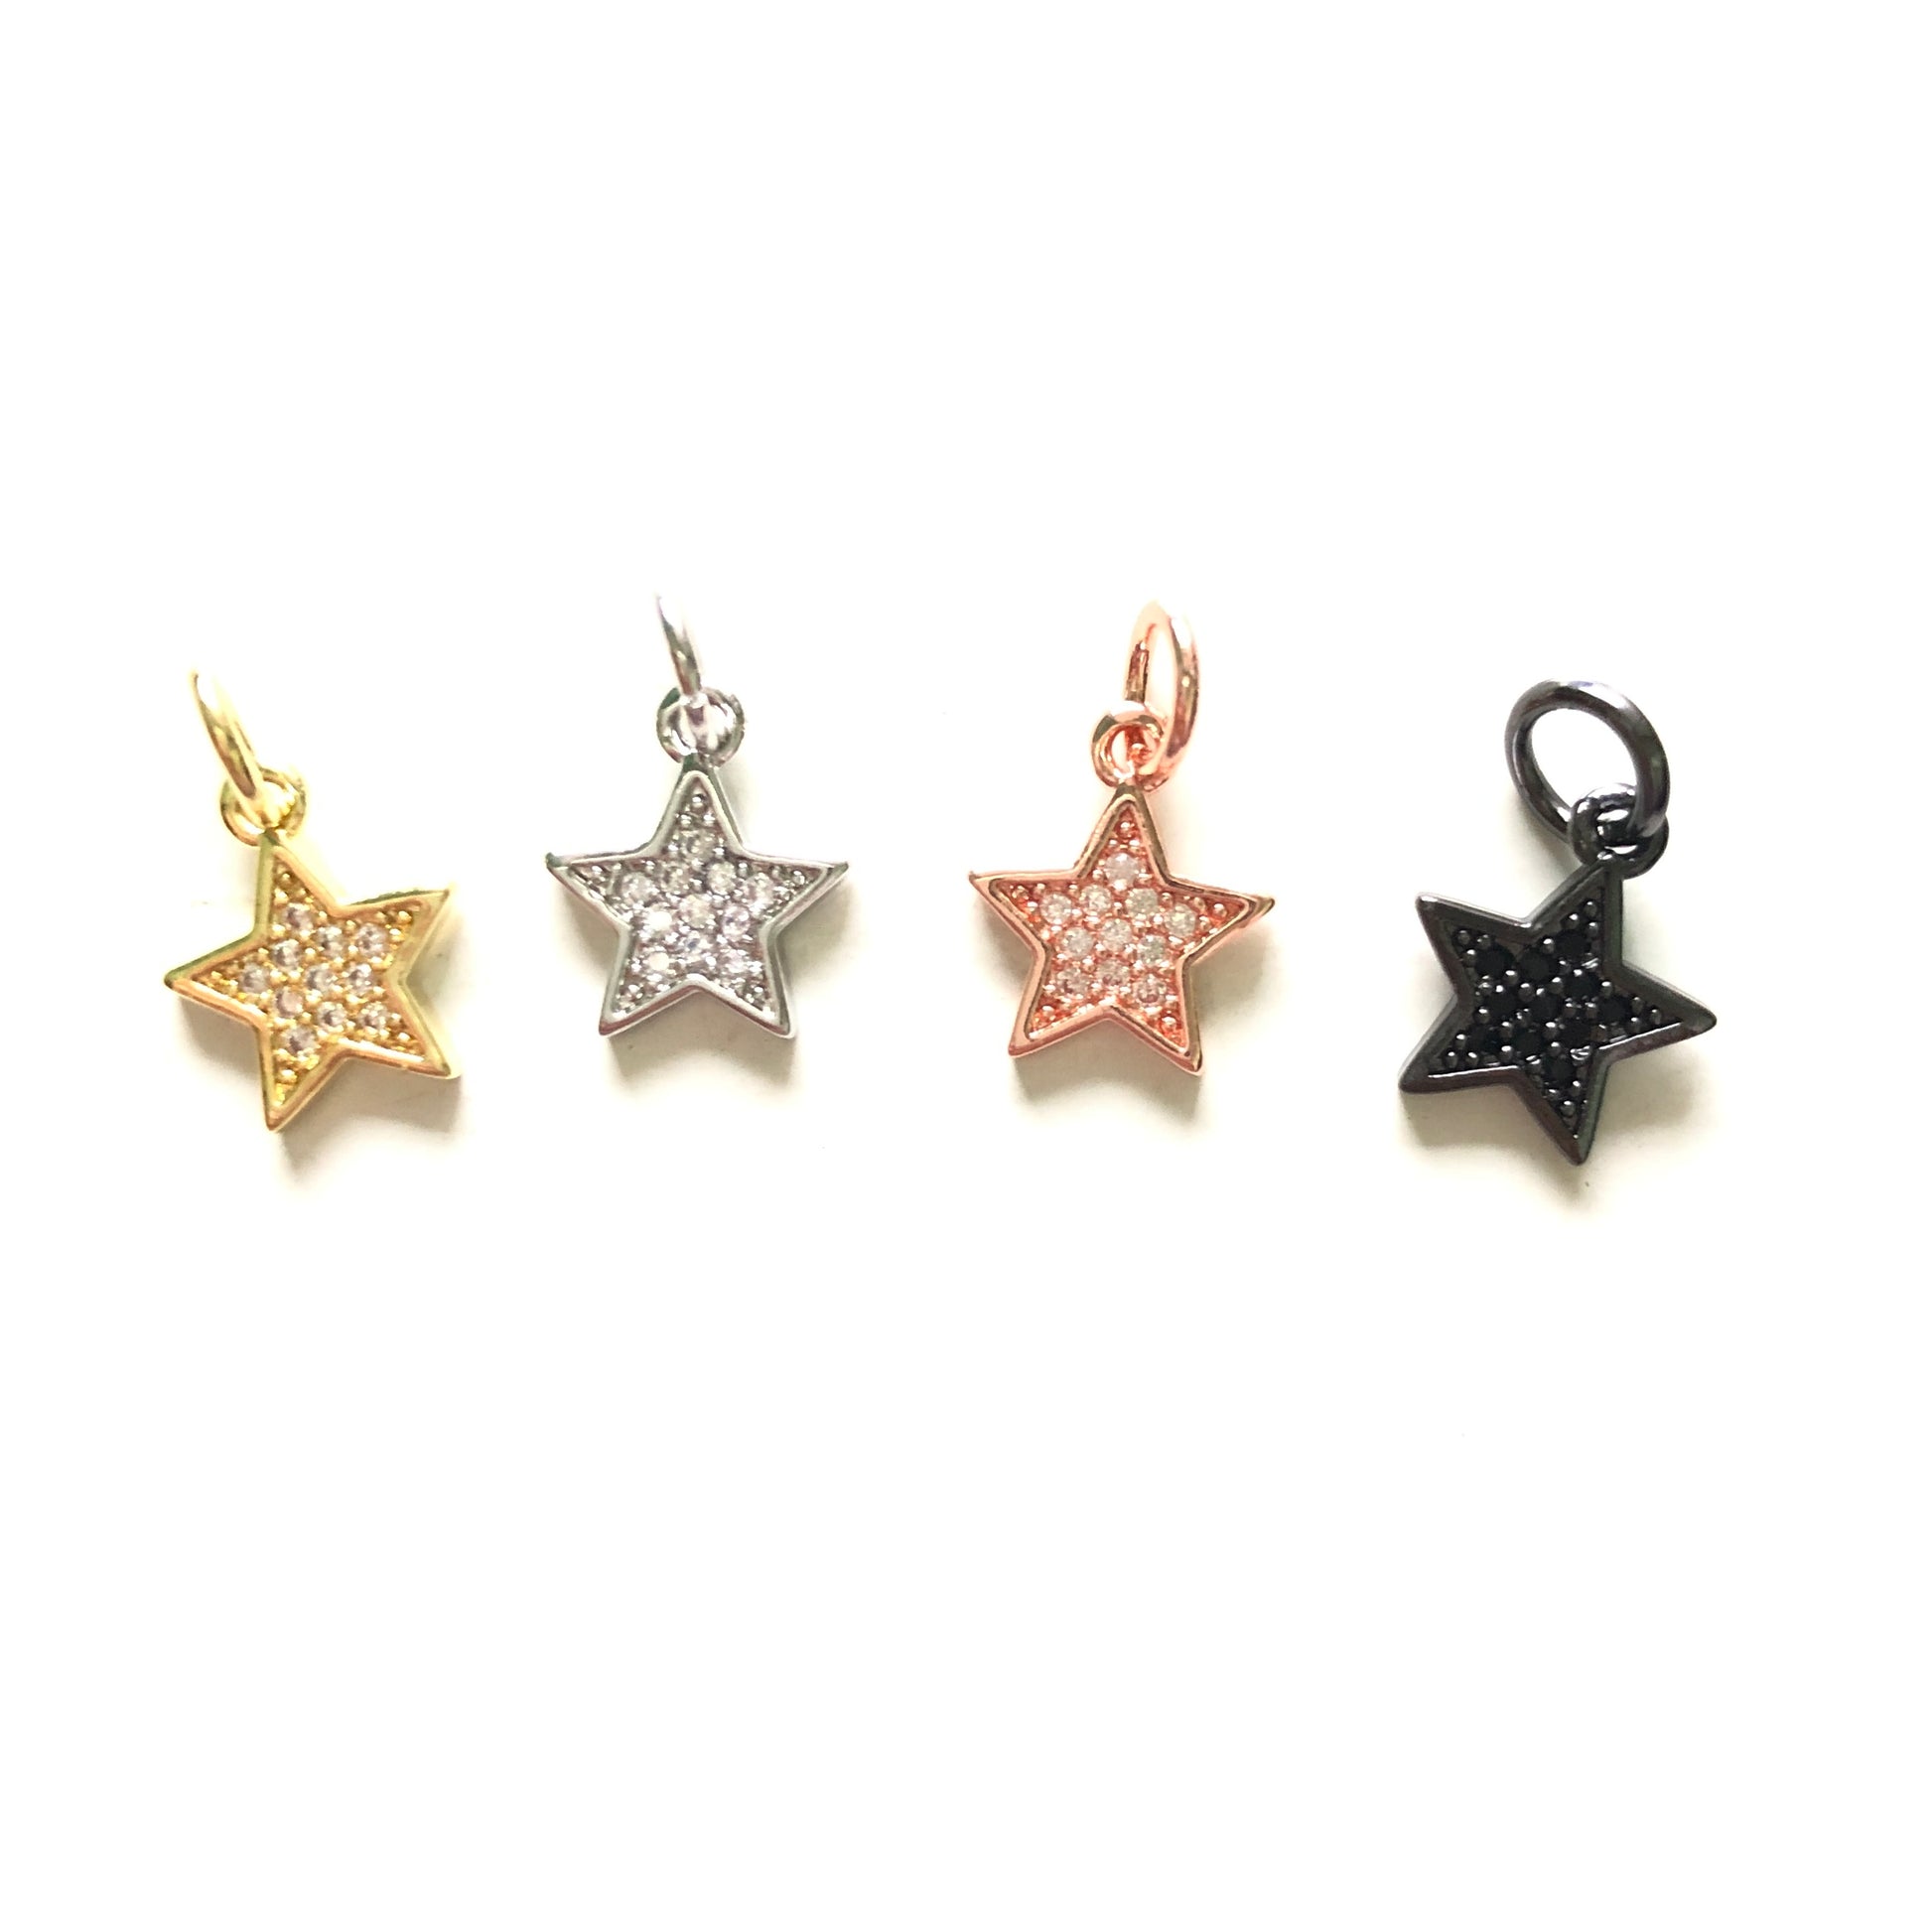 10pcs/lot 10*8.5mm Small Size CZ Pave Star Charm | Charms | Charms Beads Beyond Mix Colors